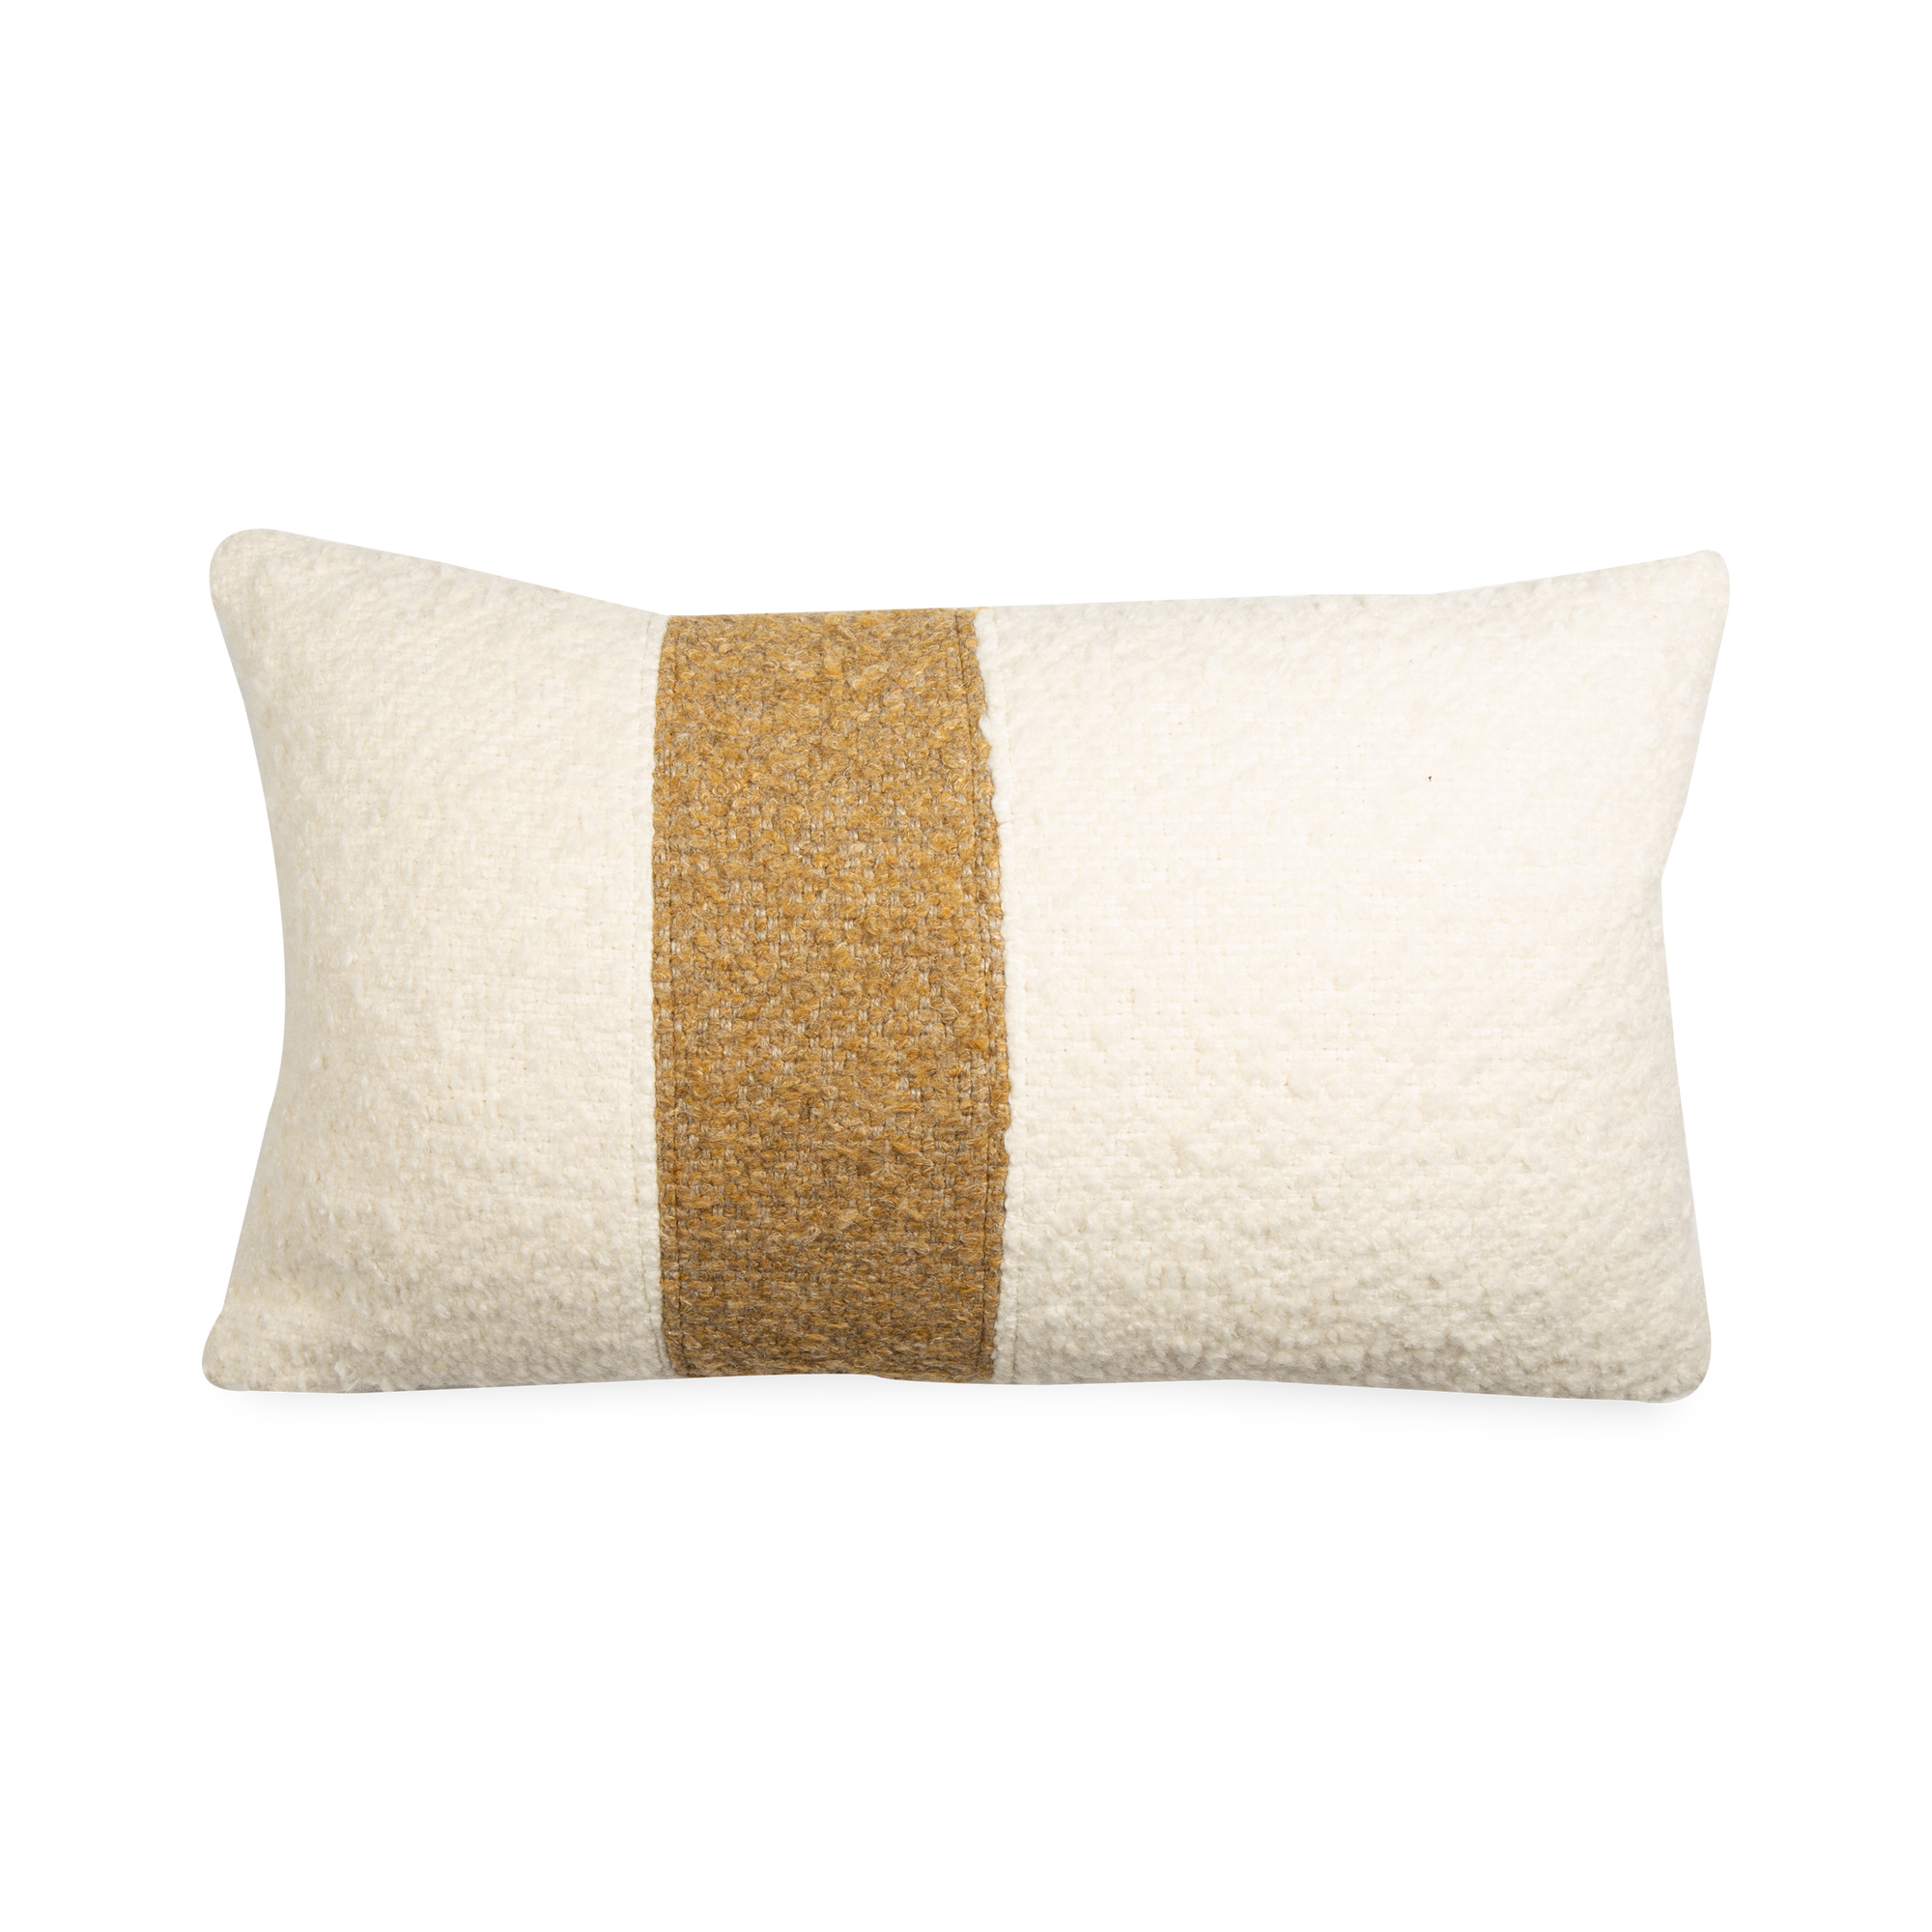 The Daya Pillow features muted earth tones, a soft texture and a colour blocking design.